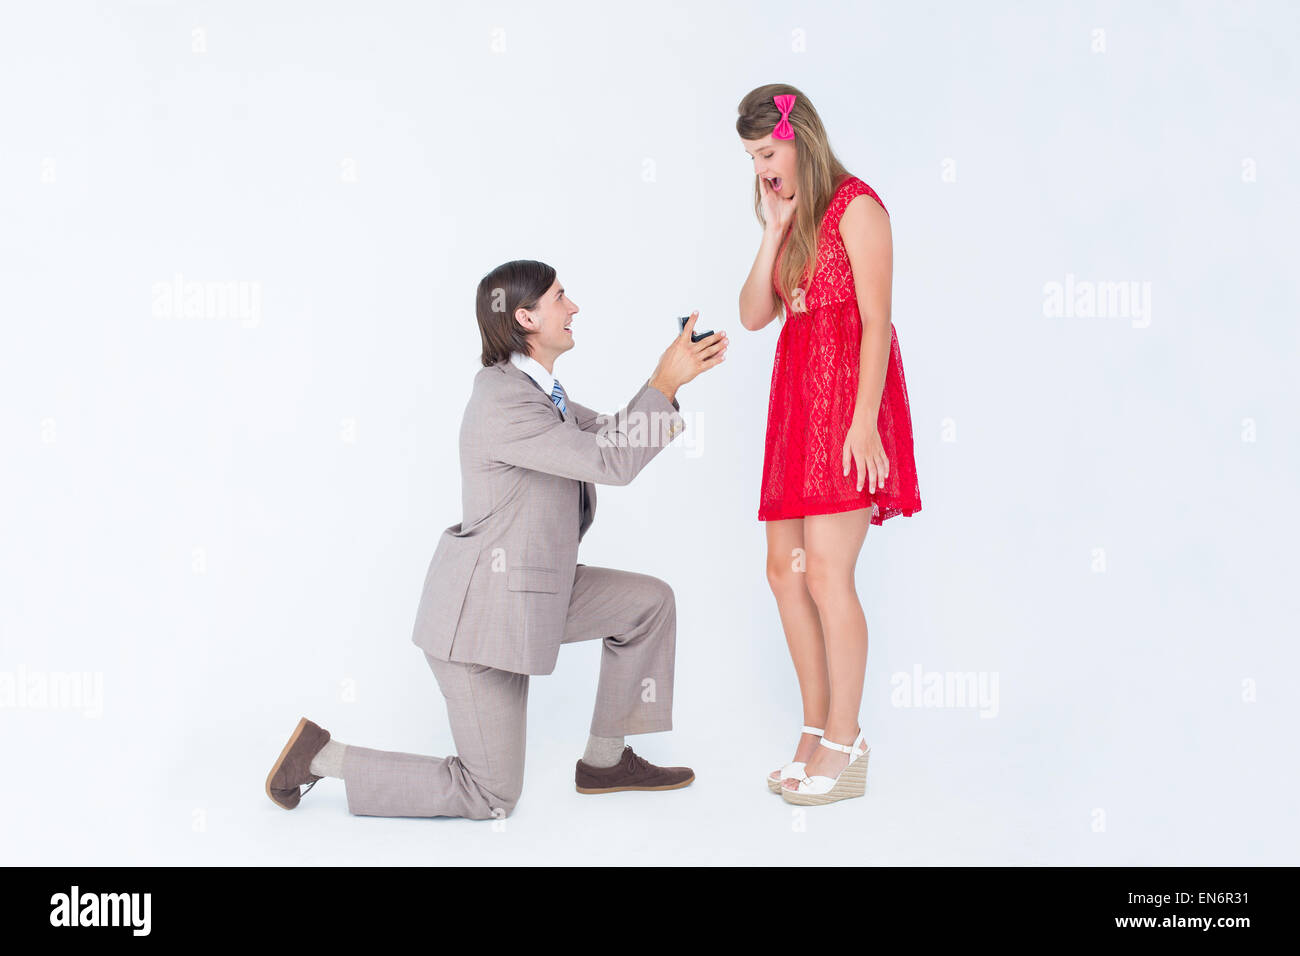 Hipster on bended knee doing a marriage proposal to his girlfriend Stock Photo